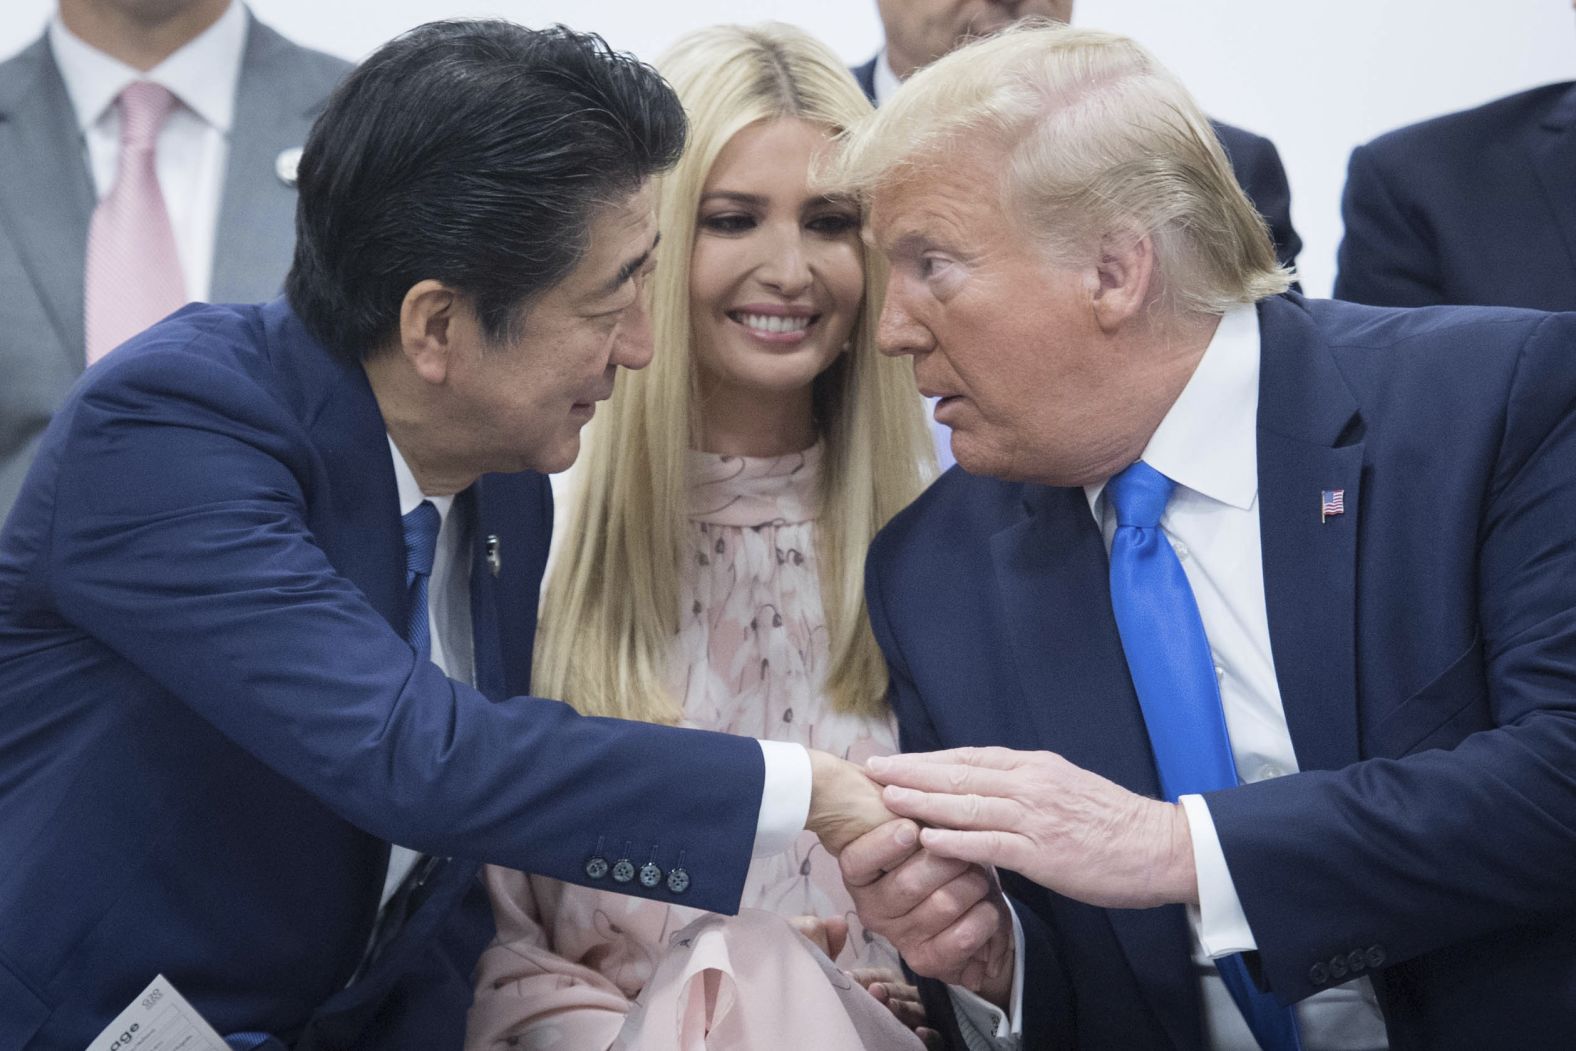 US President Donald Trump attends a meeting of G20 leaders to discuss women empowerment. He was joined by his daughter, Ivanka, and Japanese Prime Minister Shinzo Abe.